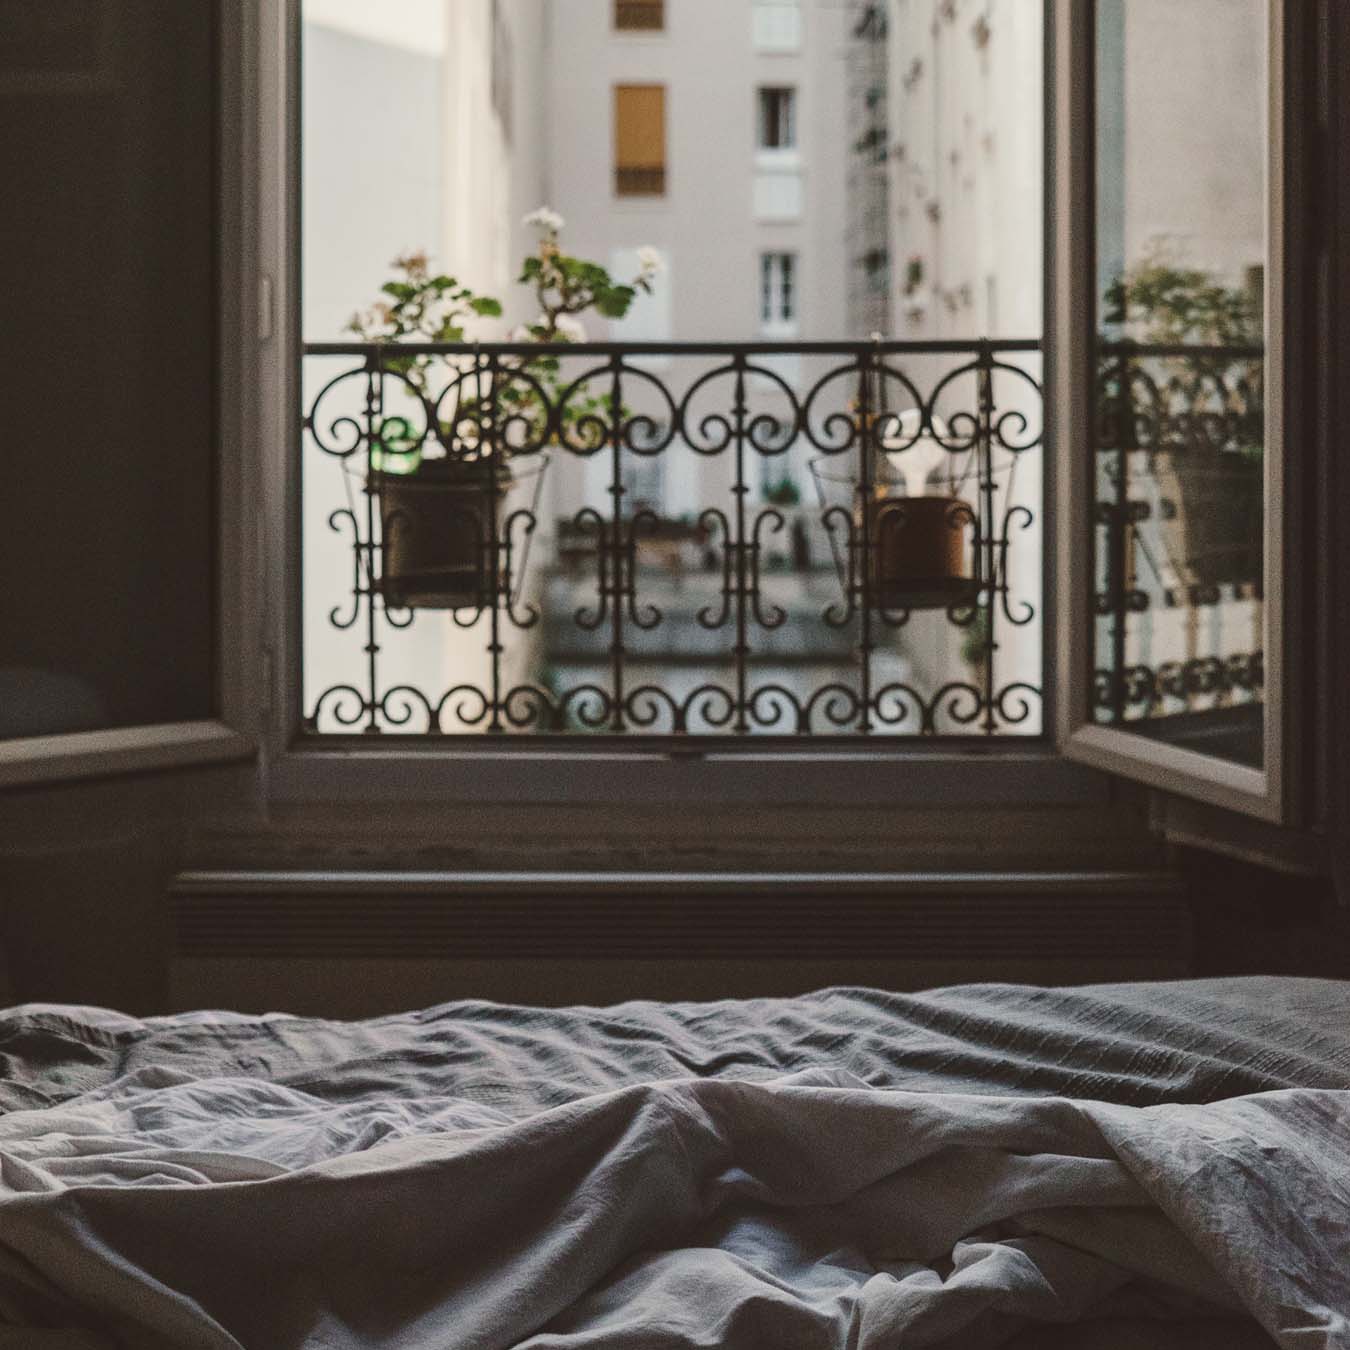 A made bed stands in front of an open window with flowers.